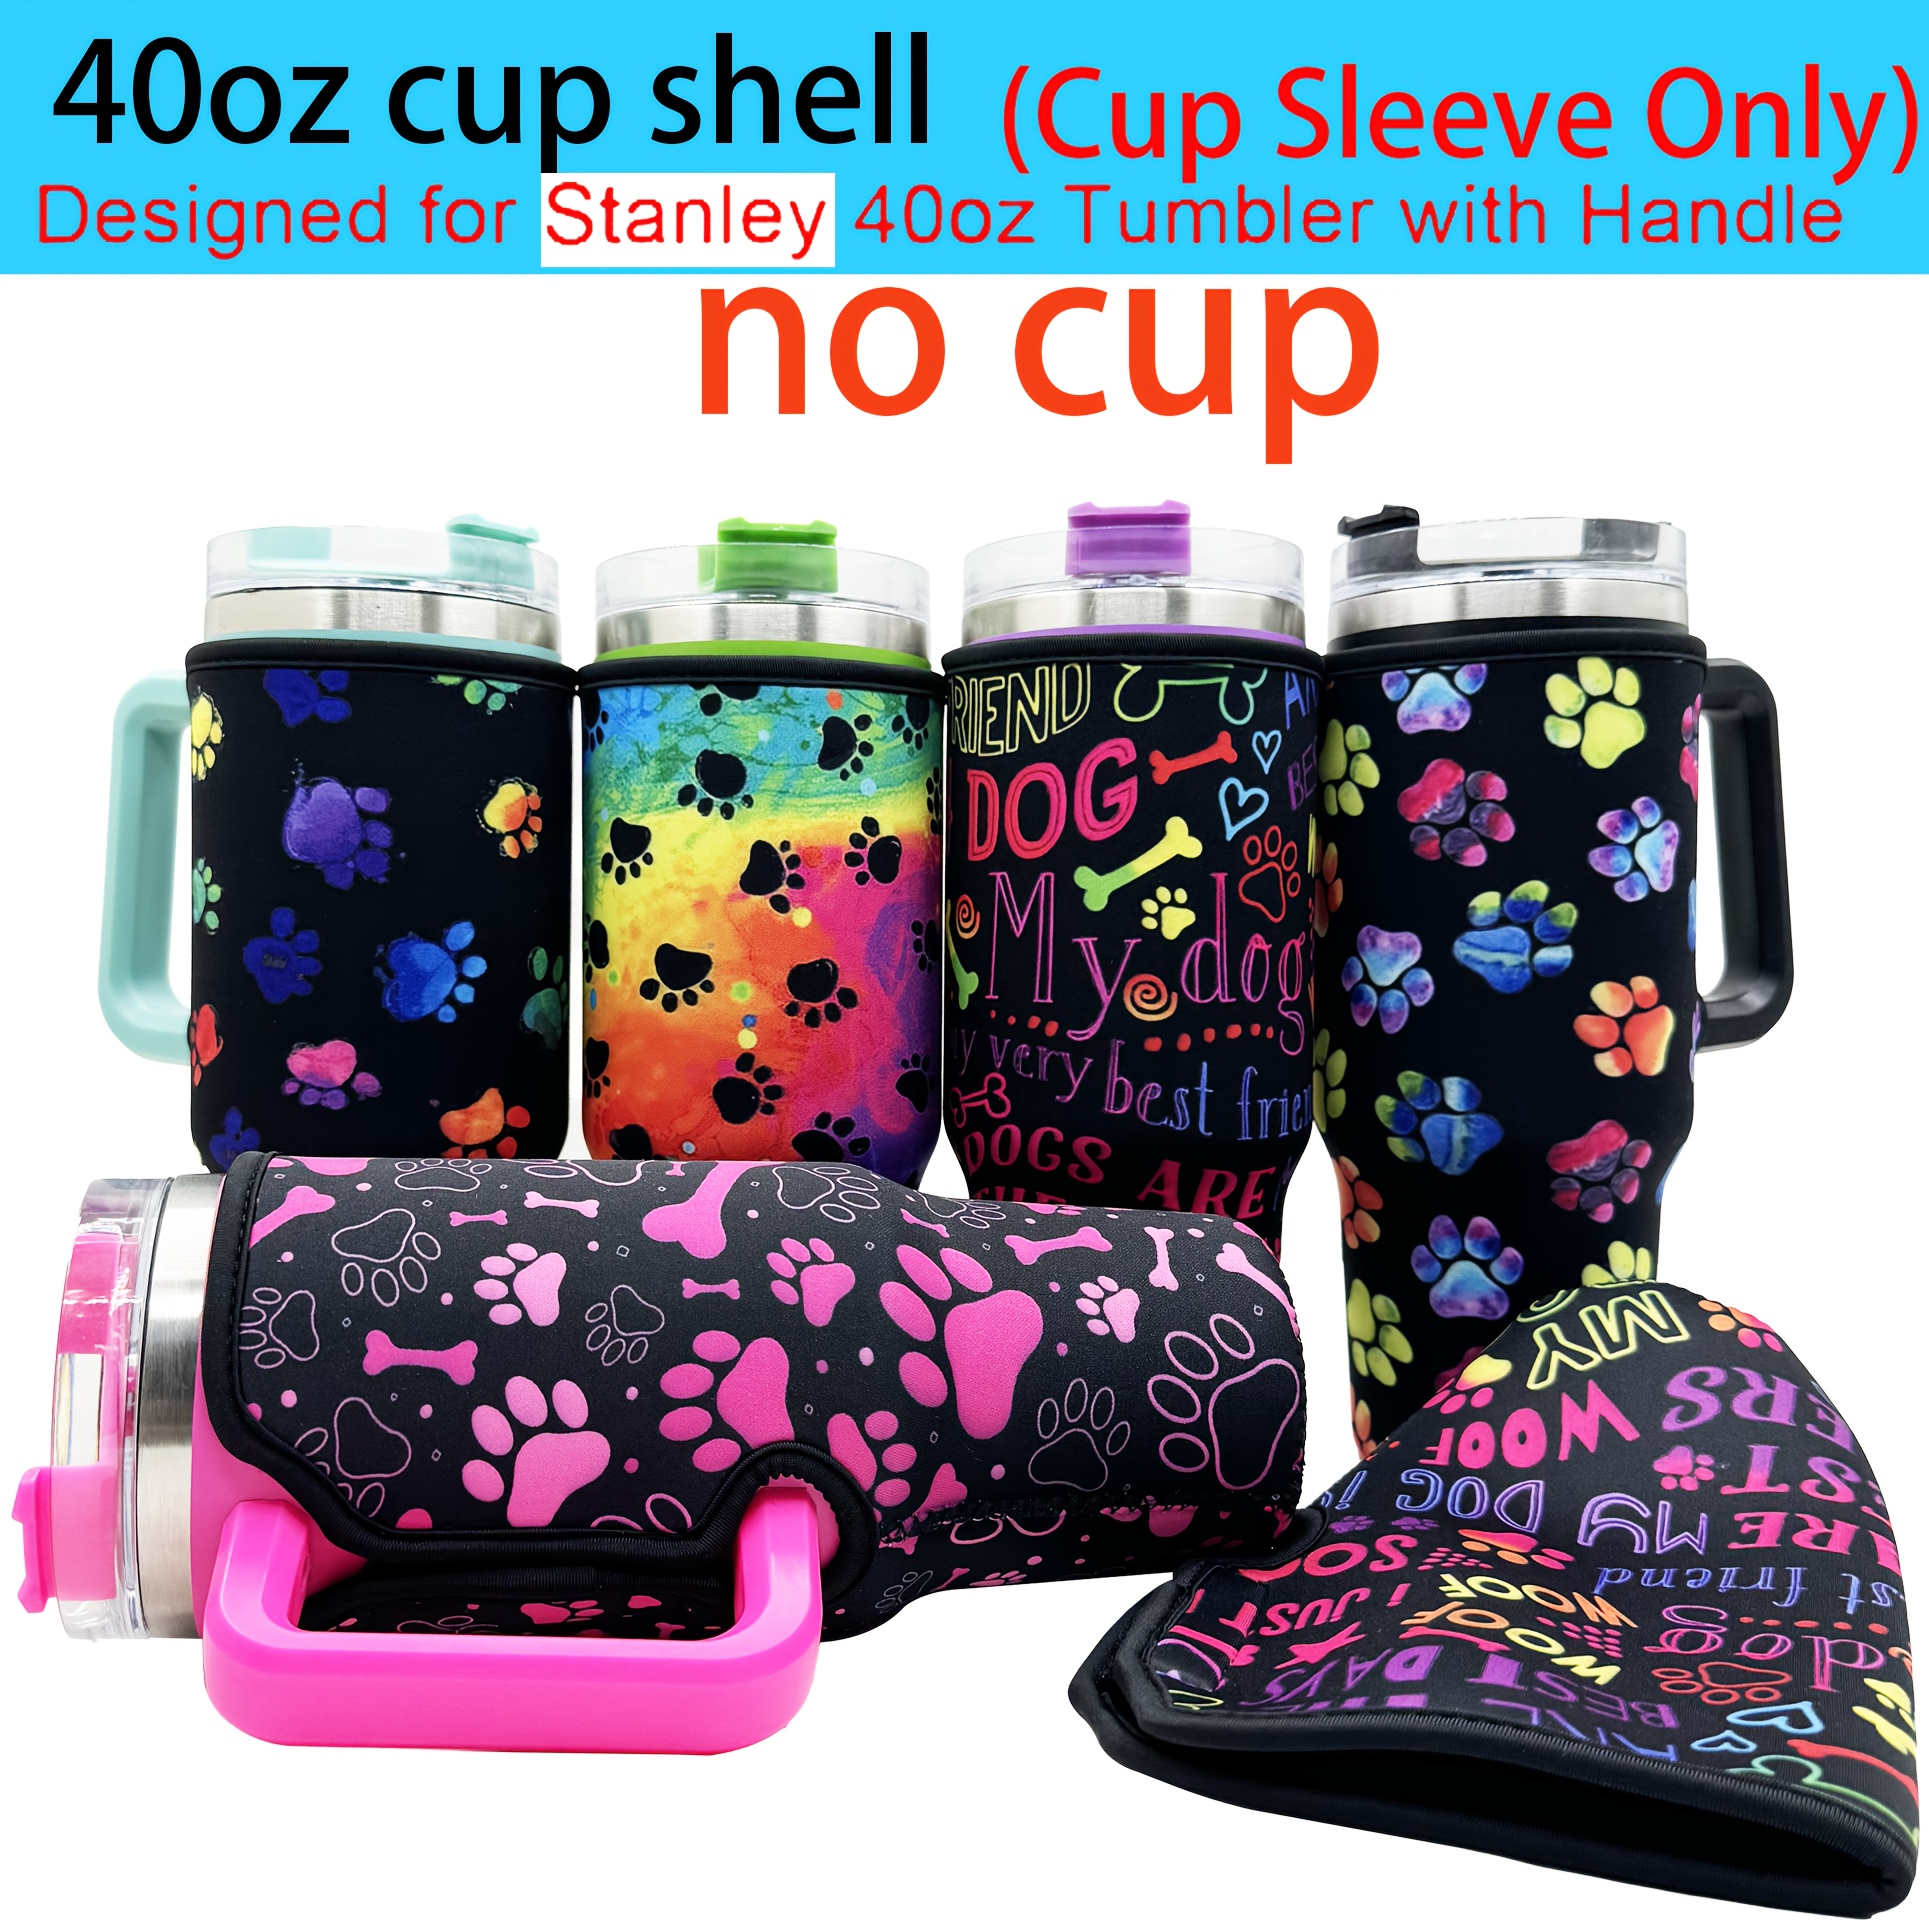 

1pc Neoprene Sleeve For Stanley 40oz Tumbler, Vibrant Rainbow Colors, Dog And Cat Paw Print Pattern, Digitally Printed, Insulated Cup Holder Accessory (cup Sleeve Only)